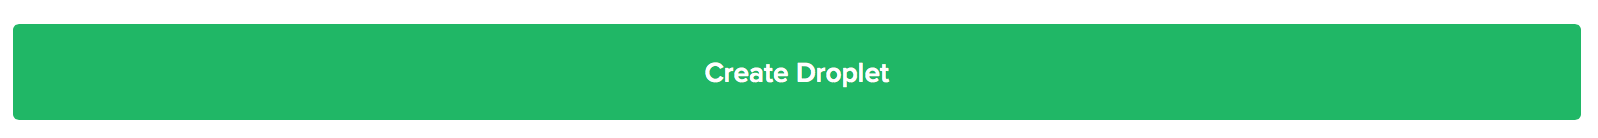 Press 'Create Droplet' to create your Owncloud instance